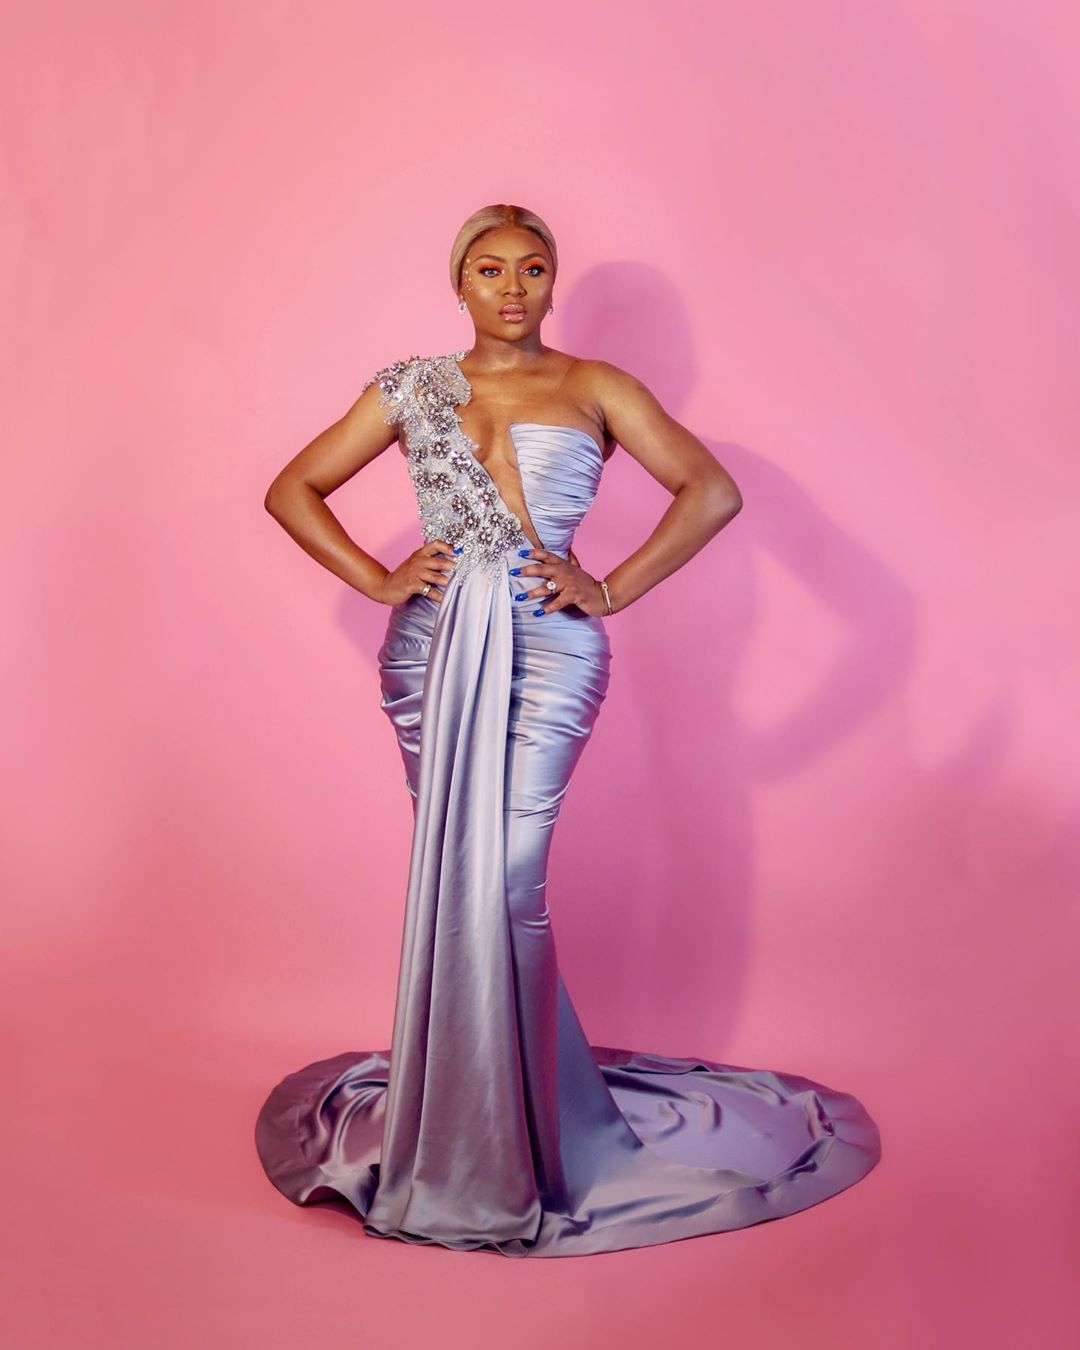 Red Carpet Glam: Here Are All The Fashion, Dresses & Outfits From AMVCA 2020